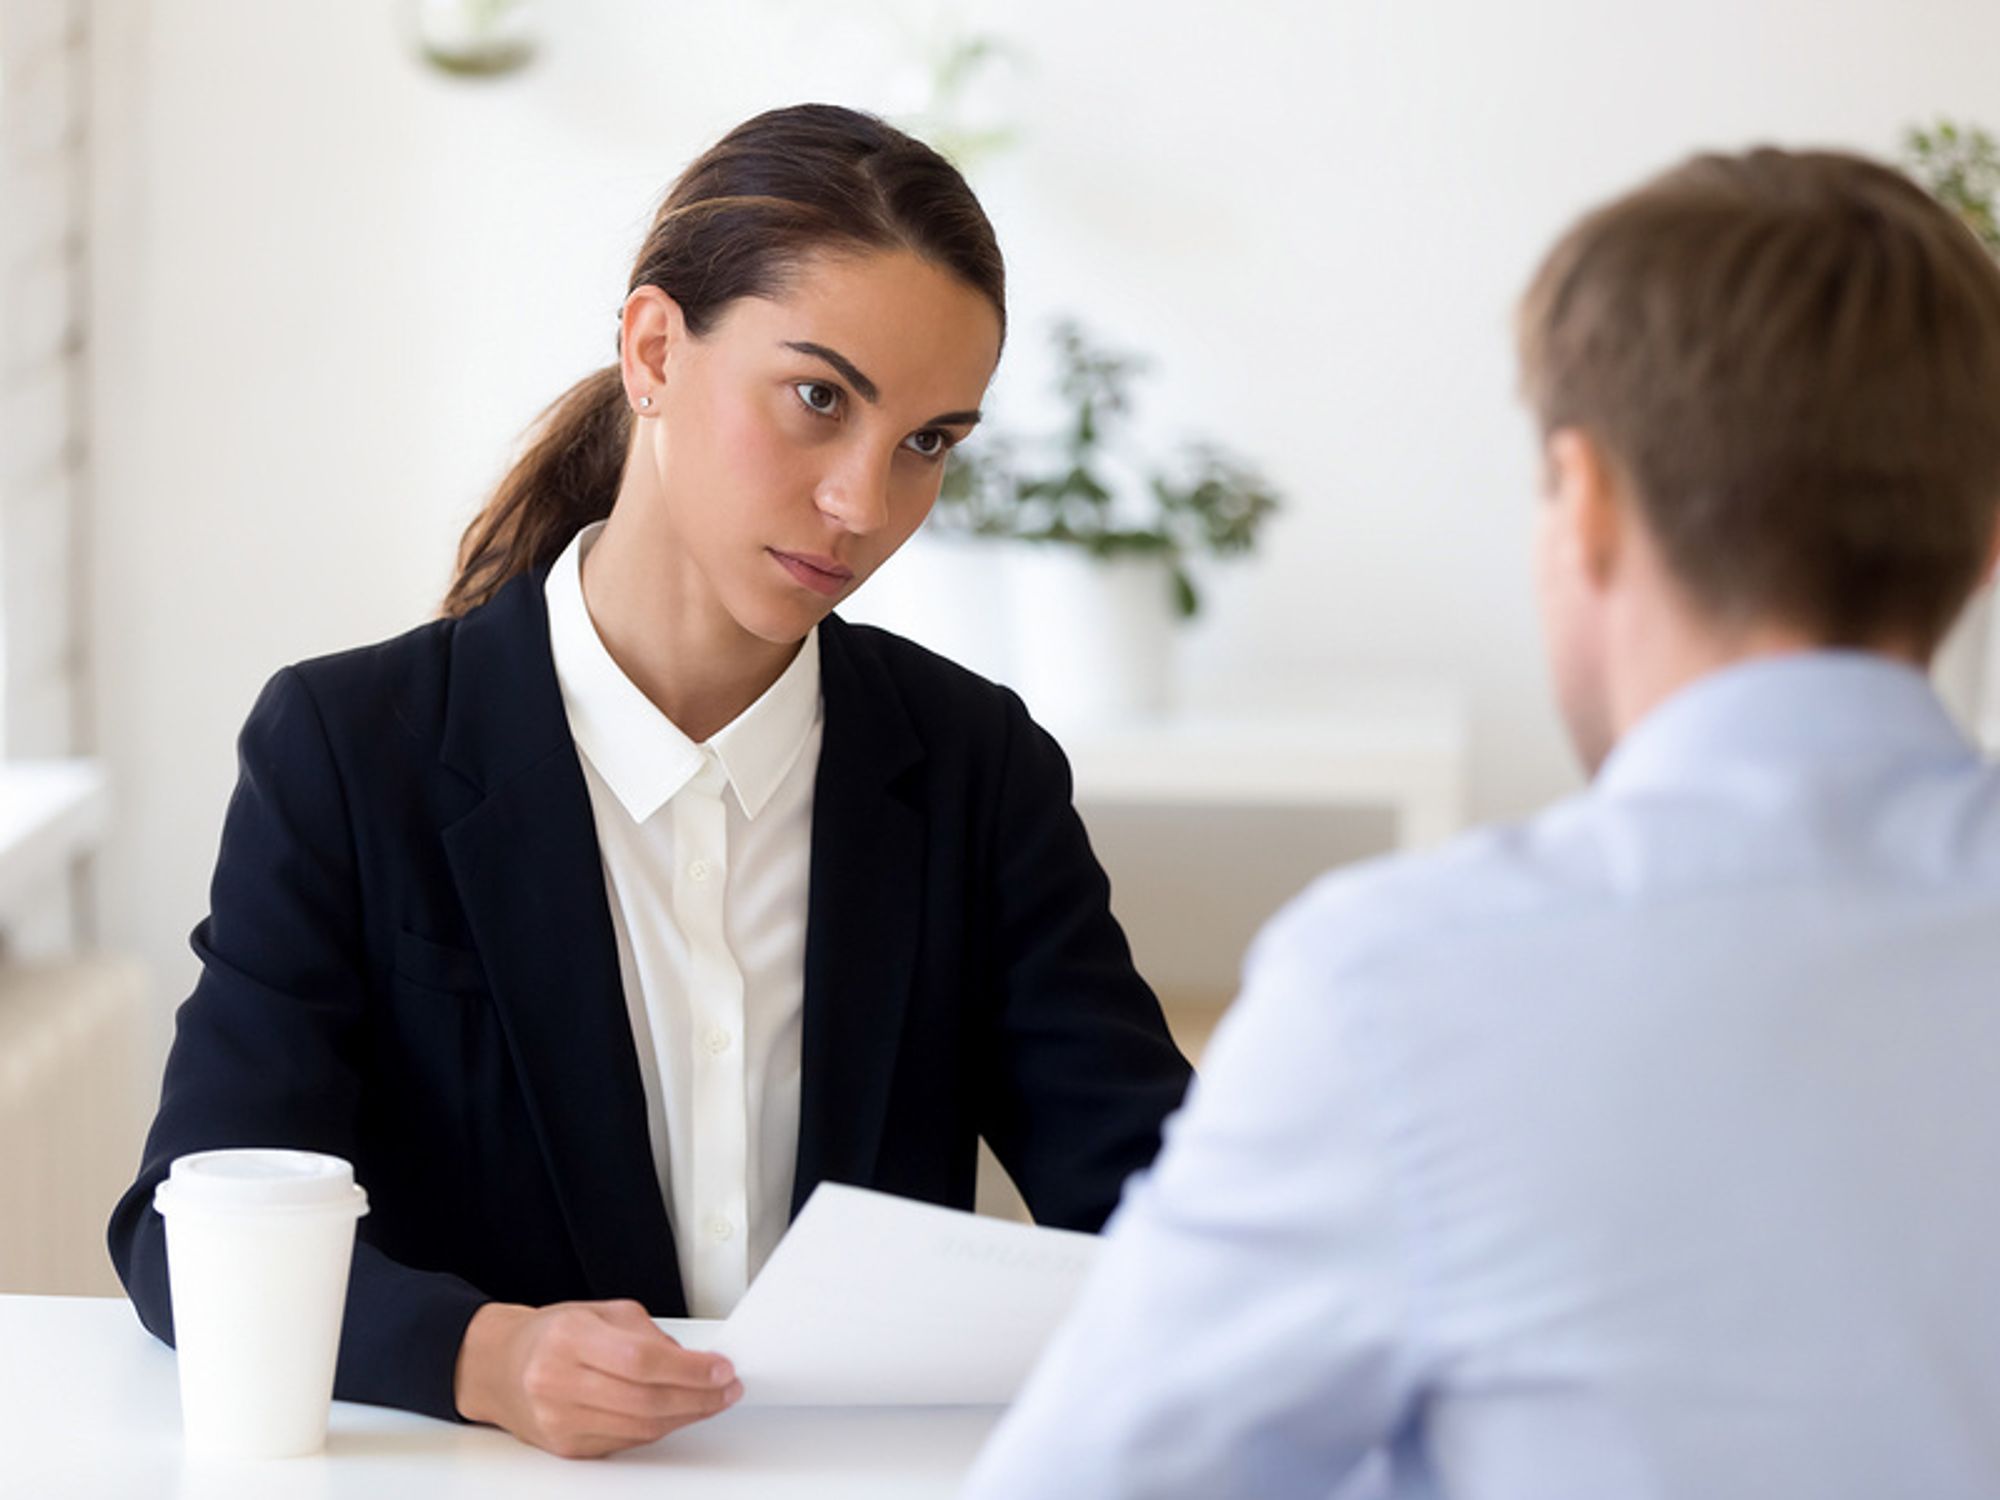 Job candidate looks desperate in his job search after asking a question during an interview